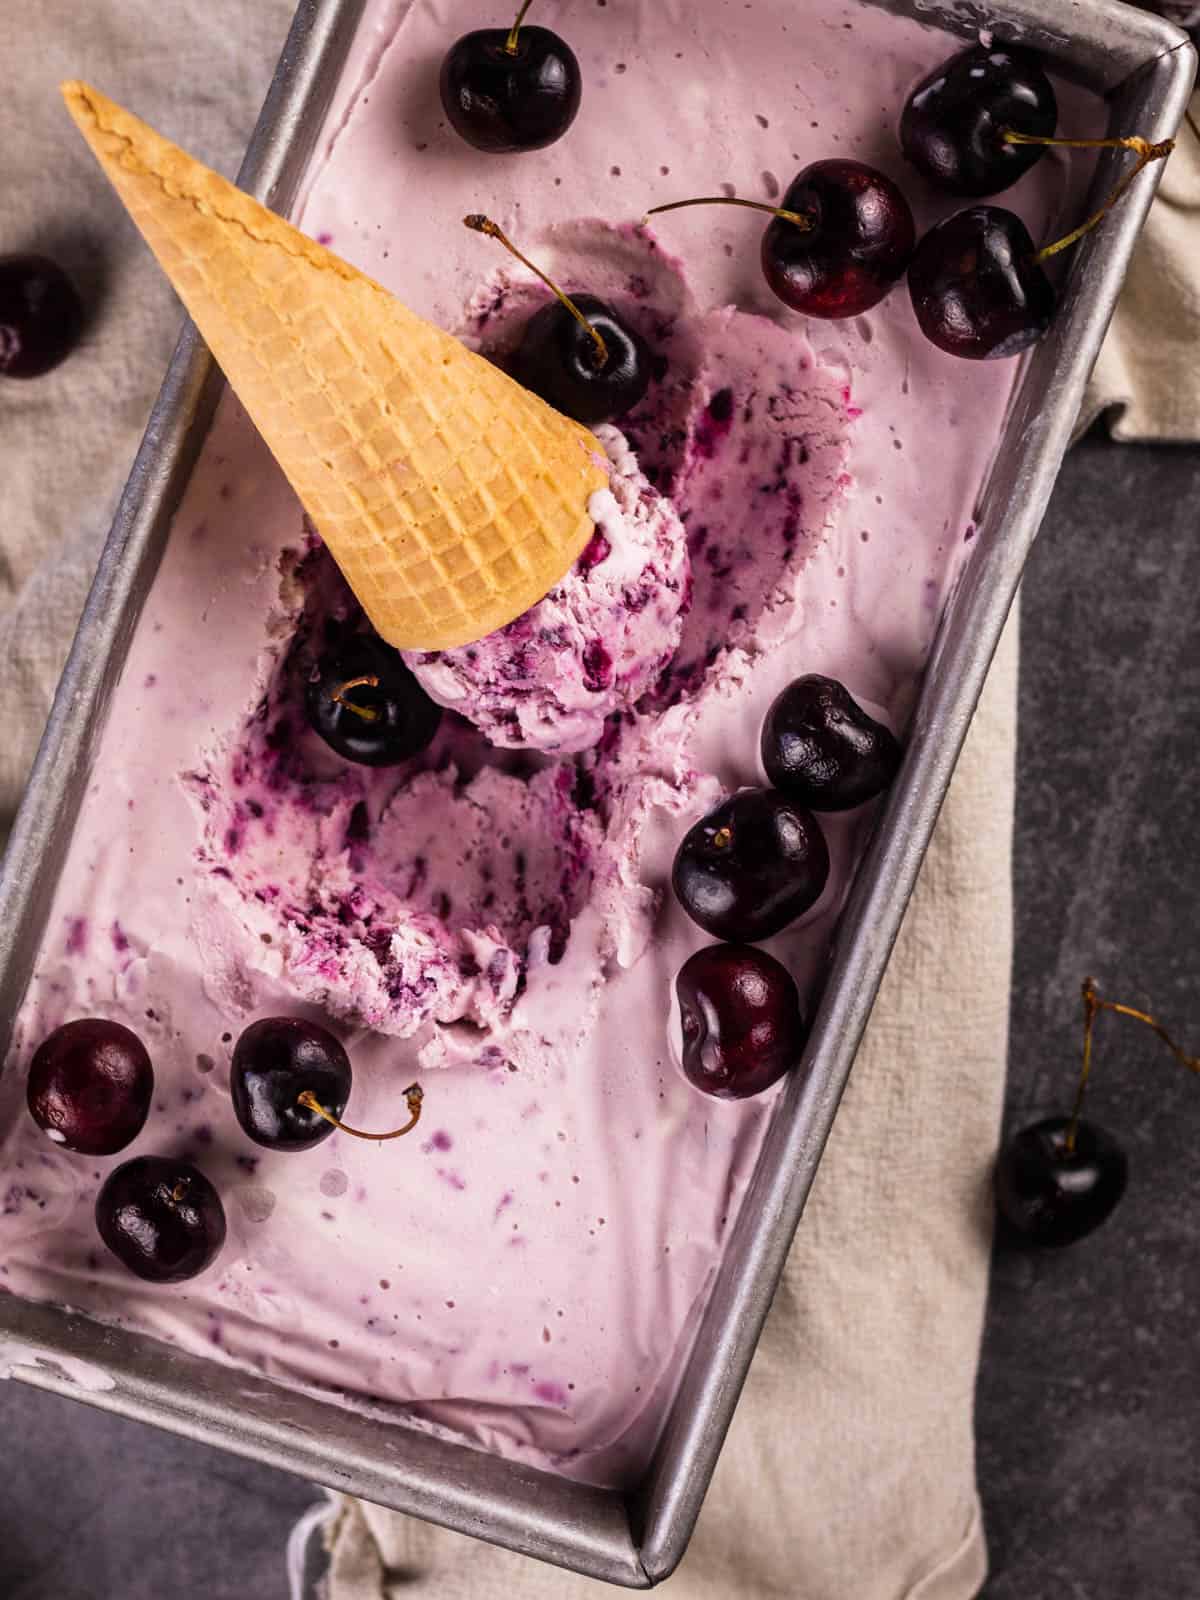 pan of black cherry ice cream with cherries and a ice cream cone sitting in it.